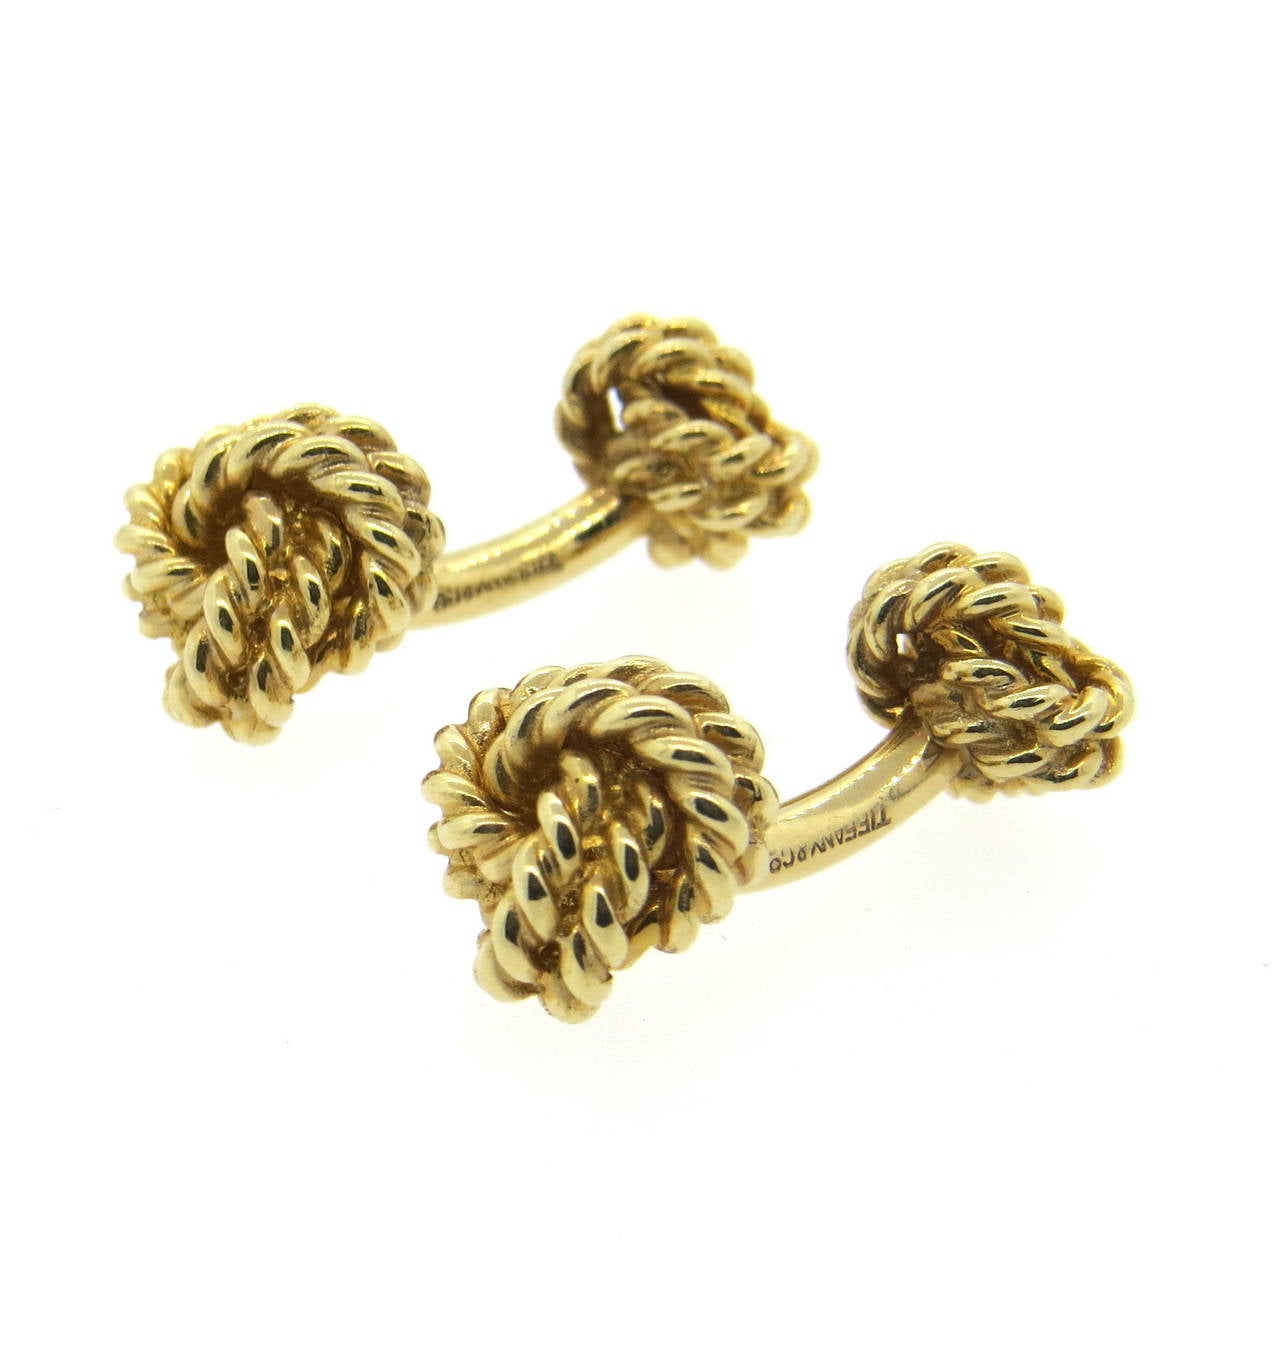 Tiffany & Co Woven Knot Cufflinks In Excellent Condition For Sale In Lambertville, NJ